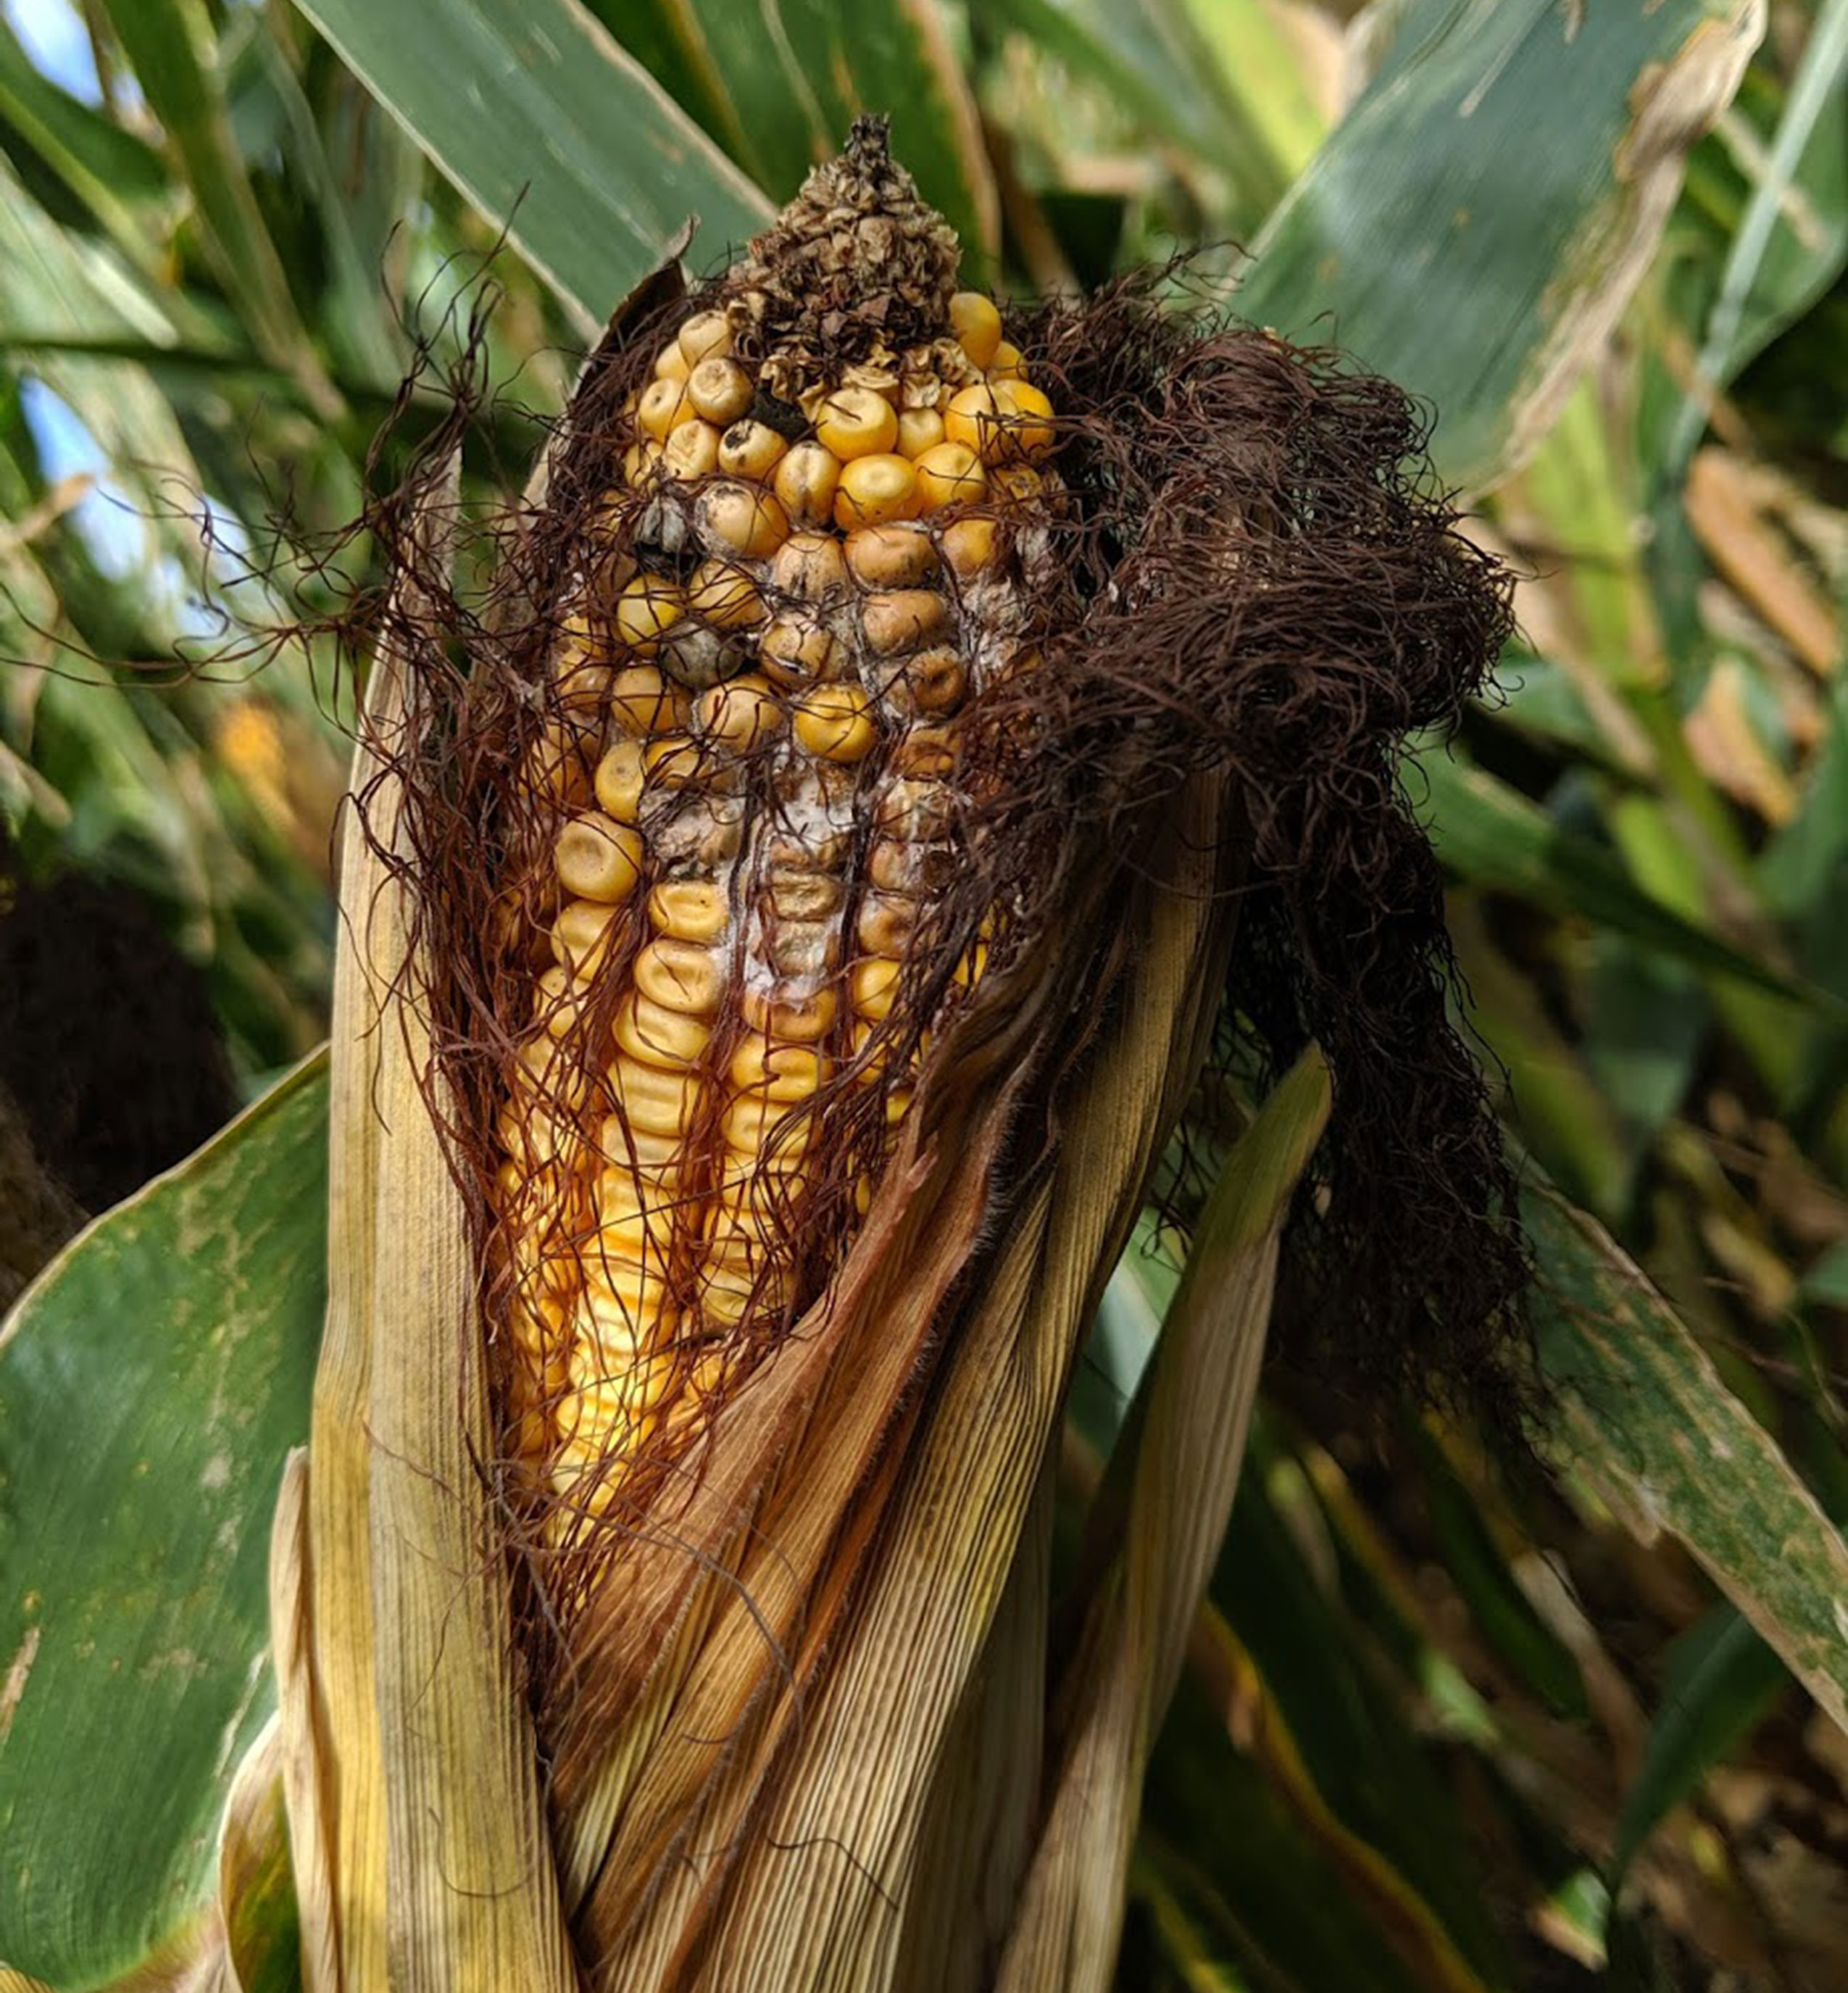 A corn husk peeled down revealing rotting kernels due to Fusarium spp.